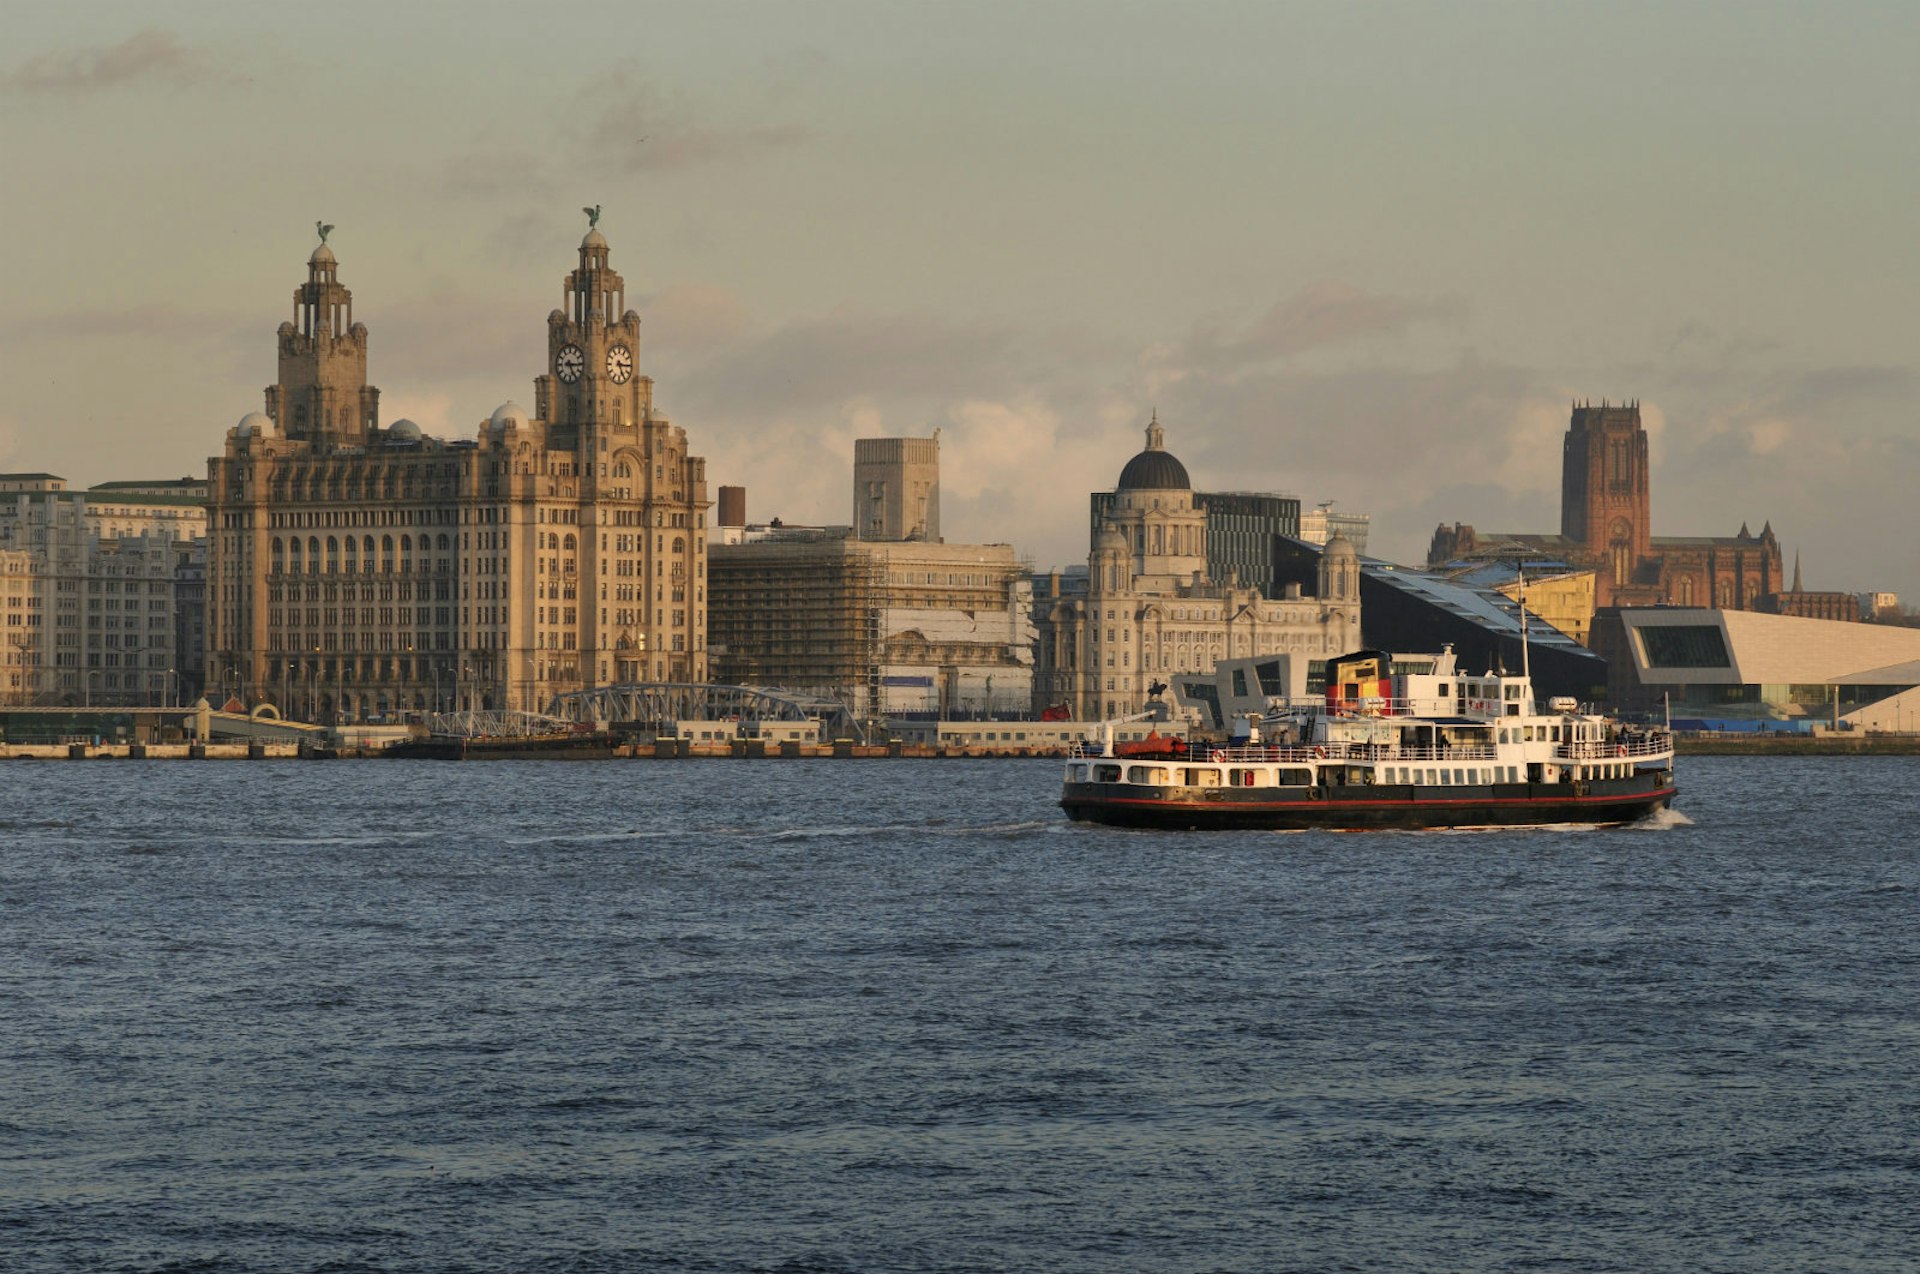 Cross the mersey on Europe's oldest ferry service © Alasdair Thomson / Getty Images